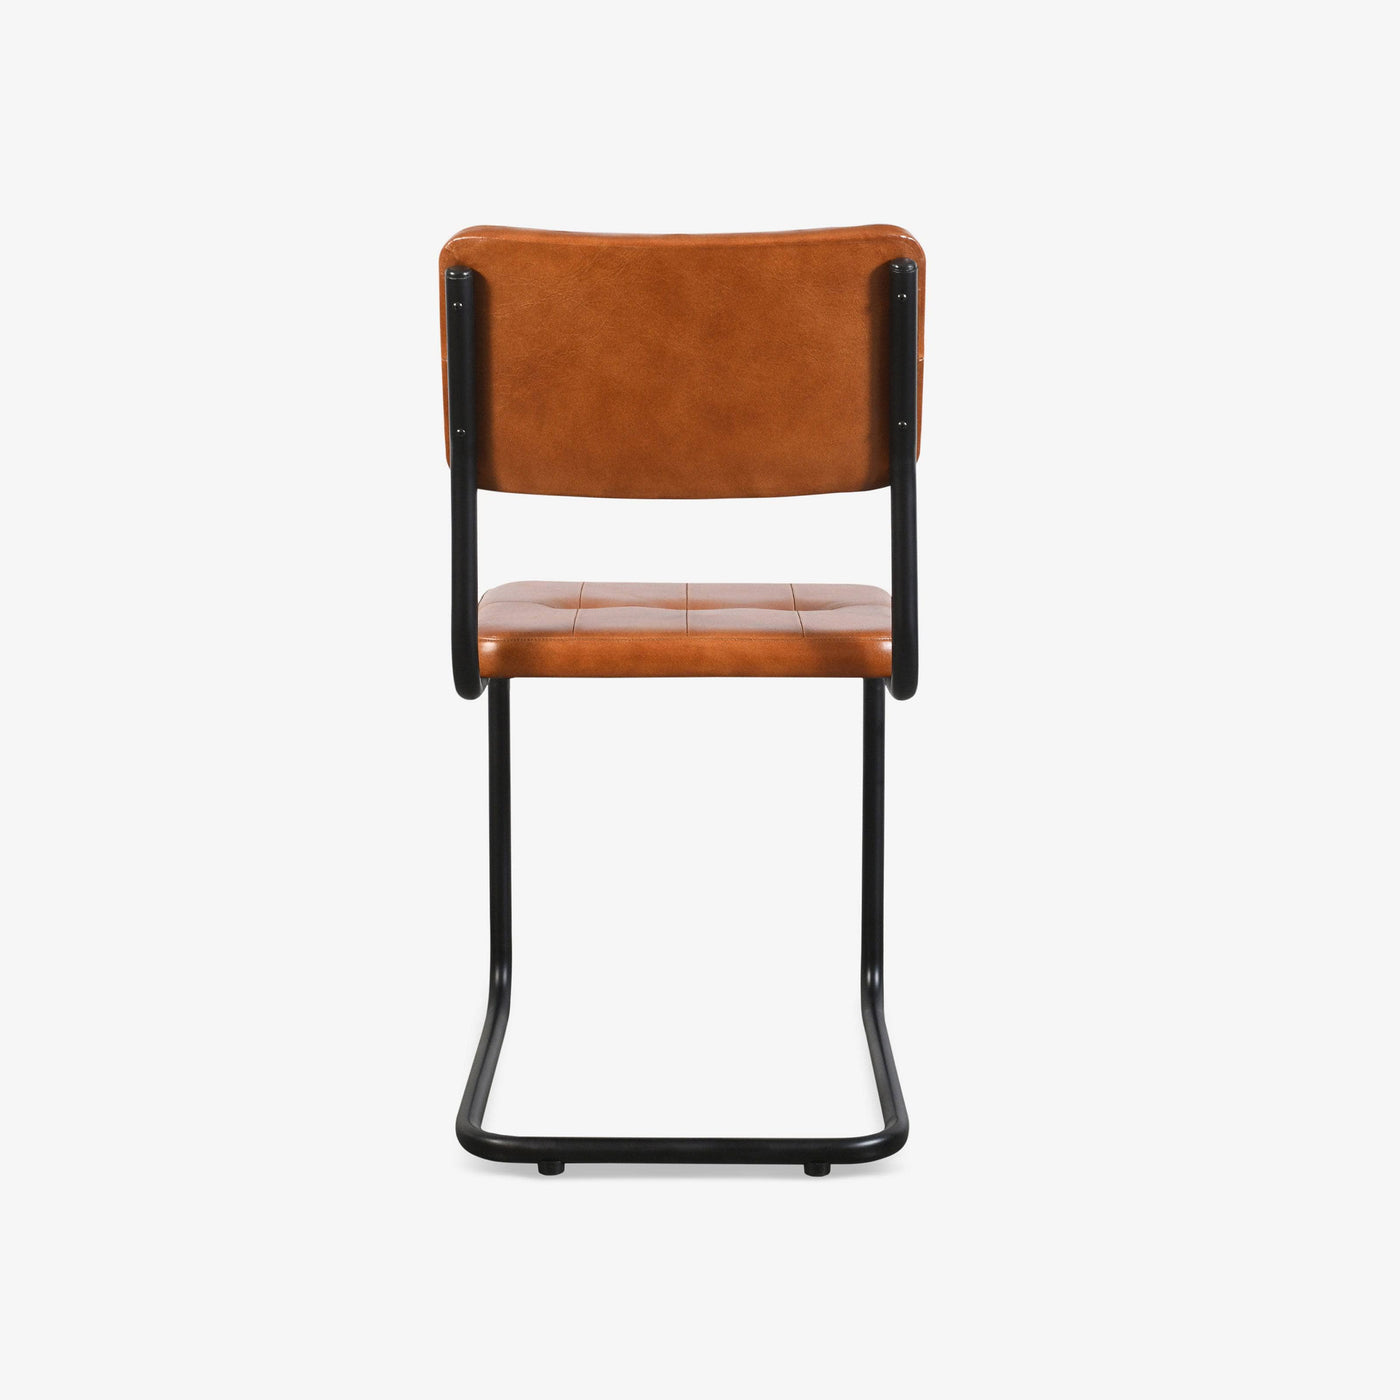 Iron Leather Chair, Brown, 44x53x88 cm - 4